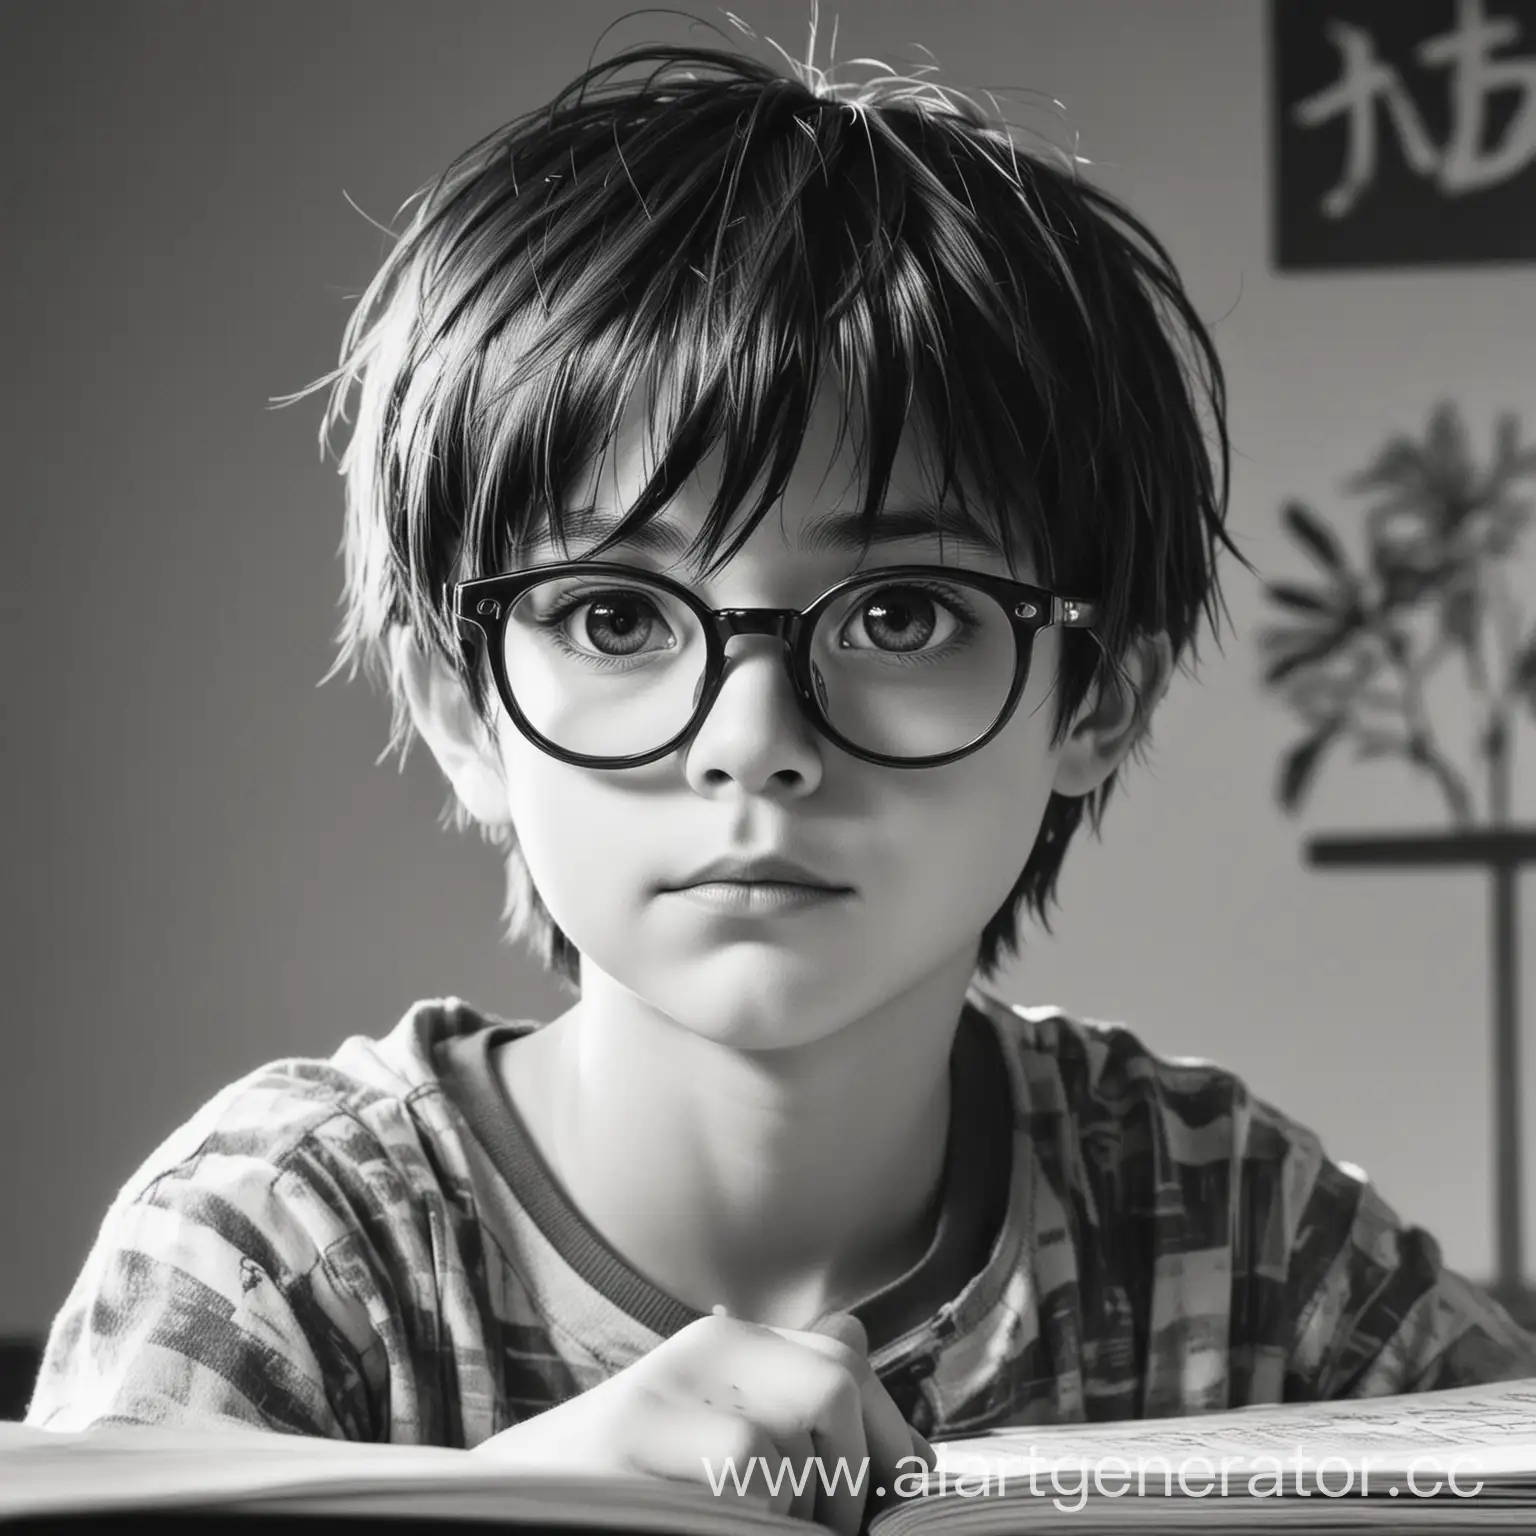 Studious-Boy-Learning-in-Manga-Black-and-White-Style